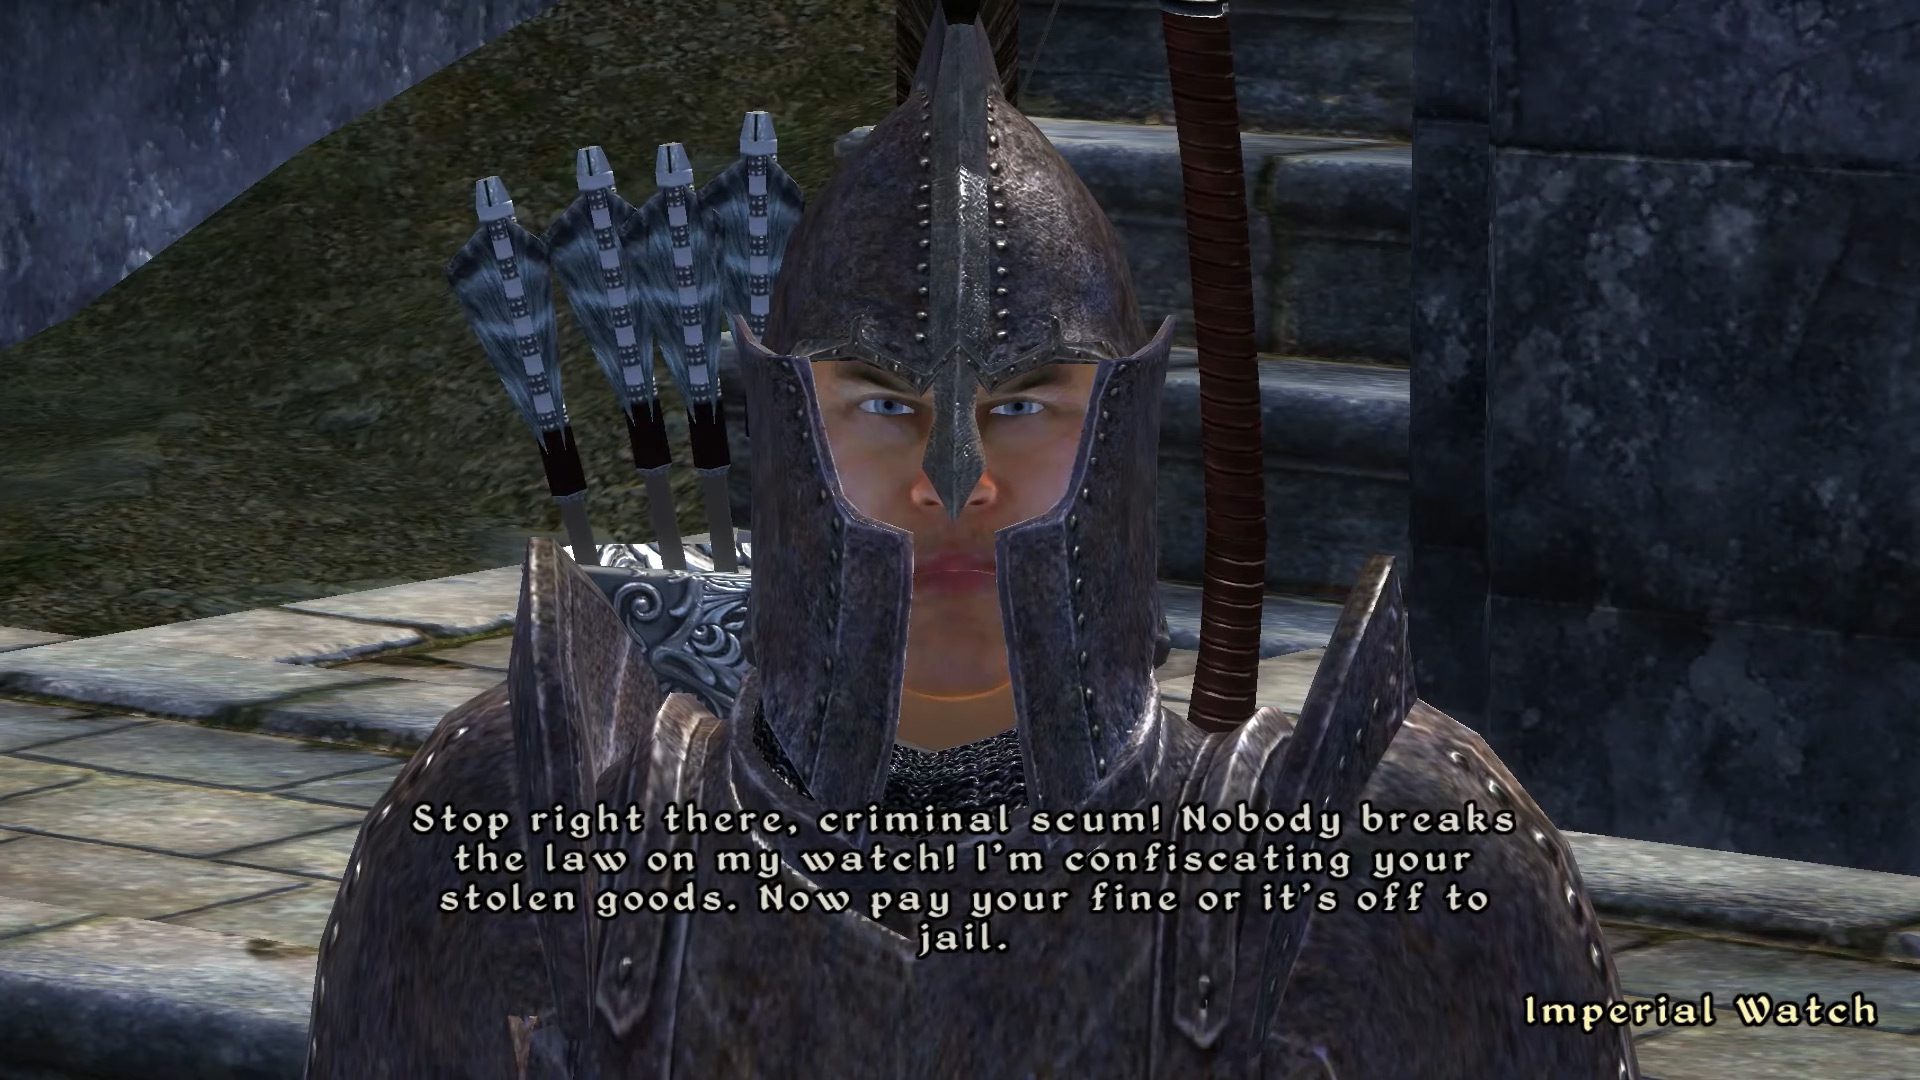 "Stop right there, criminal scum!" from Oblivion